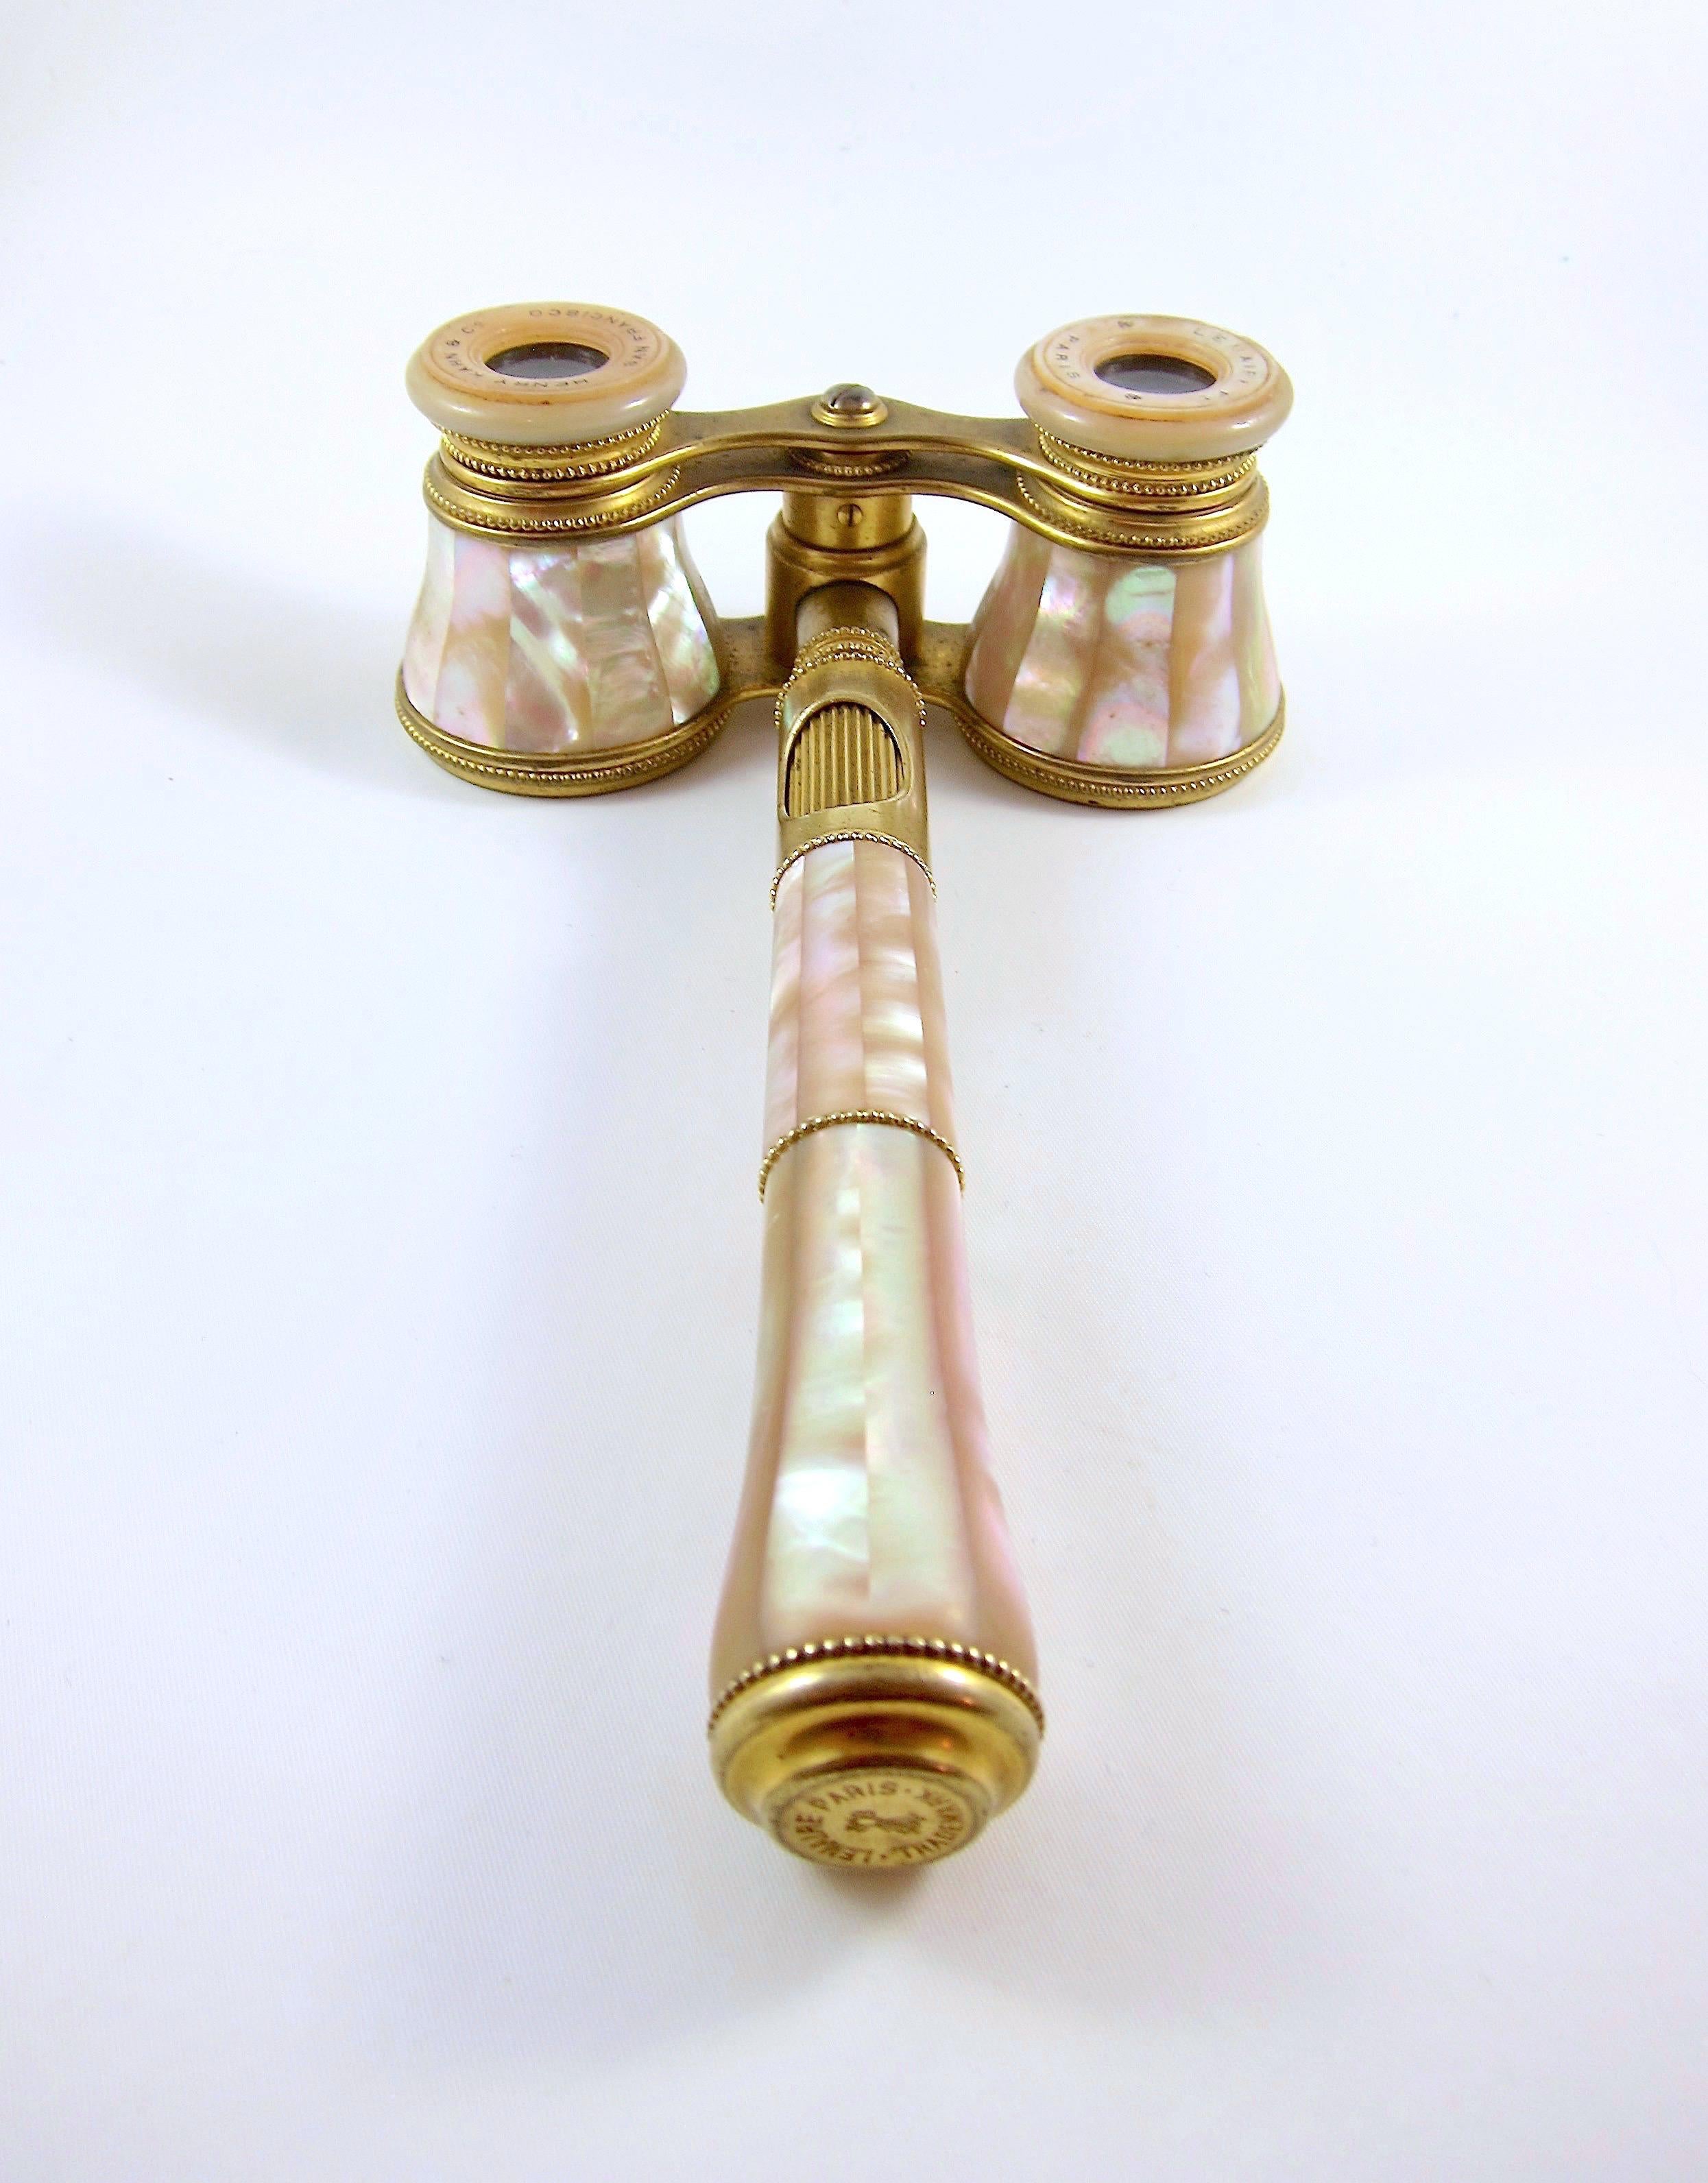 Gilt Antique French Opera Glasses with Removable Handle from Lemaire of Paris